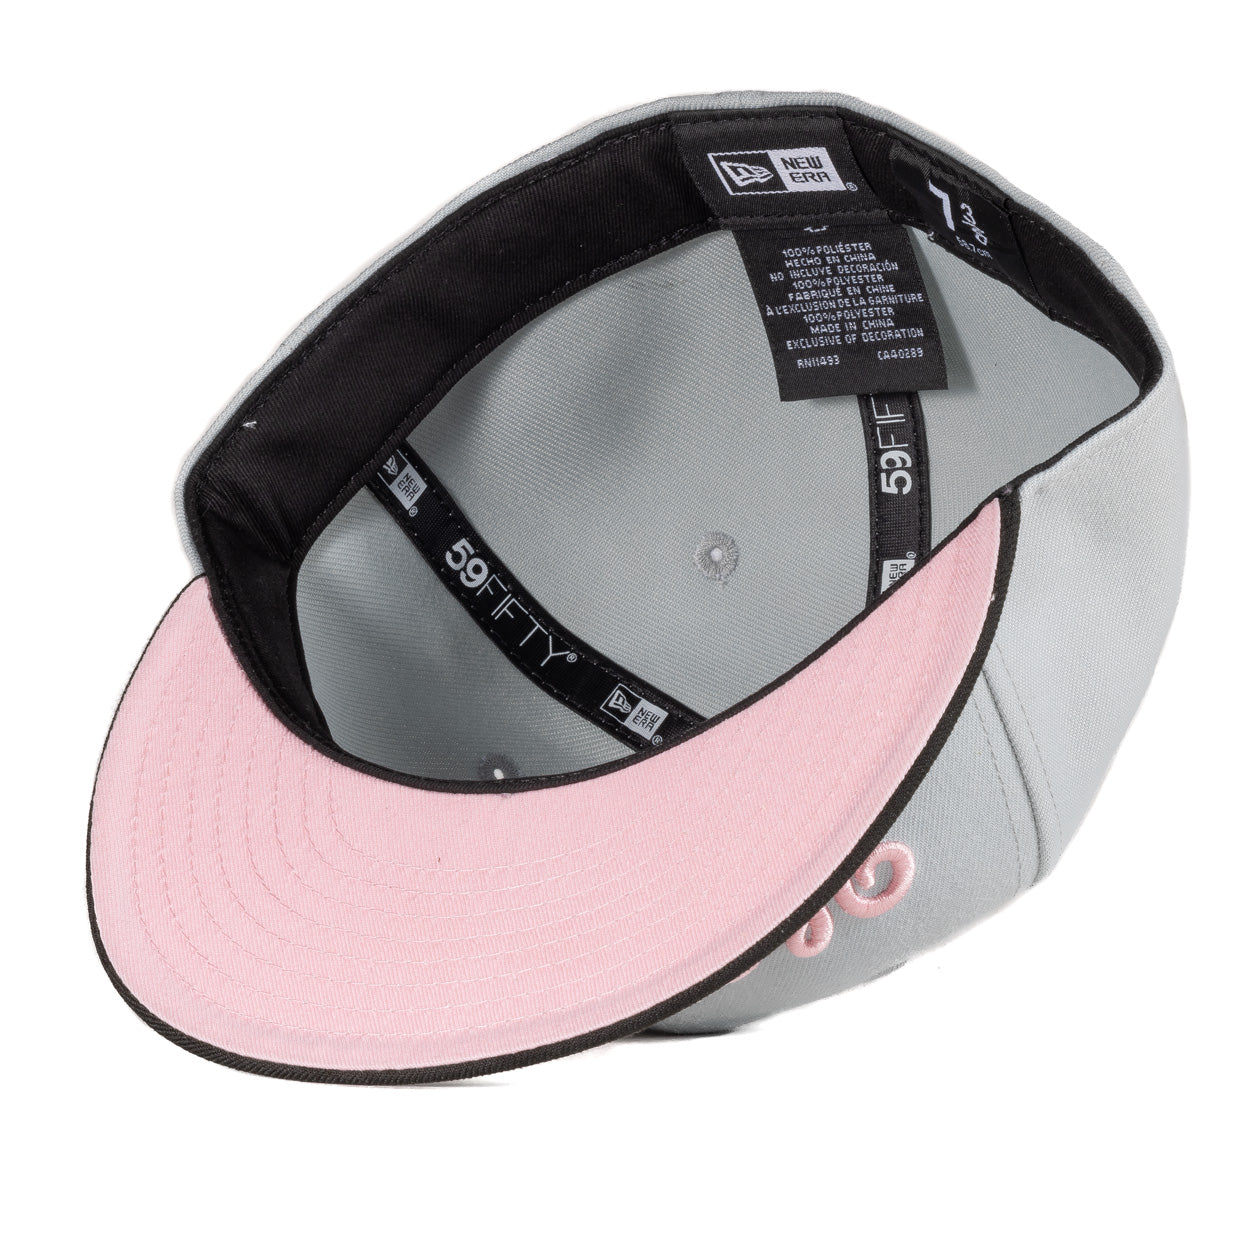 Westside Candy Chrome New Era Fitted